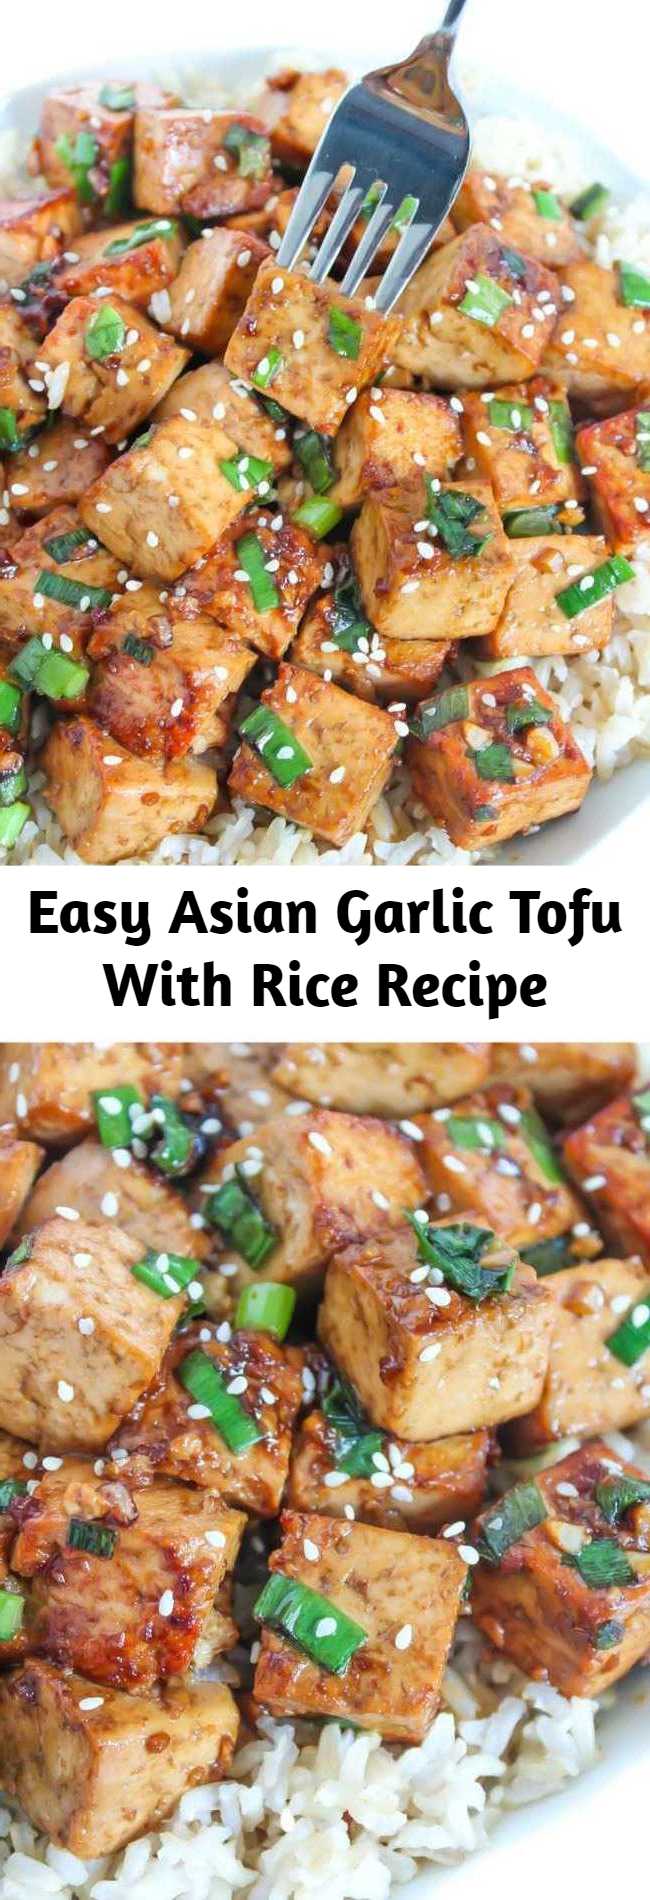 Easy Asian Garlic Tofu With Rice Recipe - Tofu marinated in an Asian-style garlic sauce that's packed with savory, delicious flavor! An easy dish that's perfect with a side of rice & steamed veggies. (vegan, gluten-free)